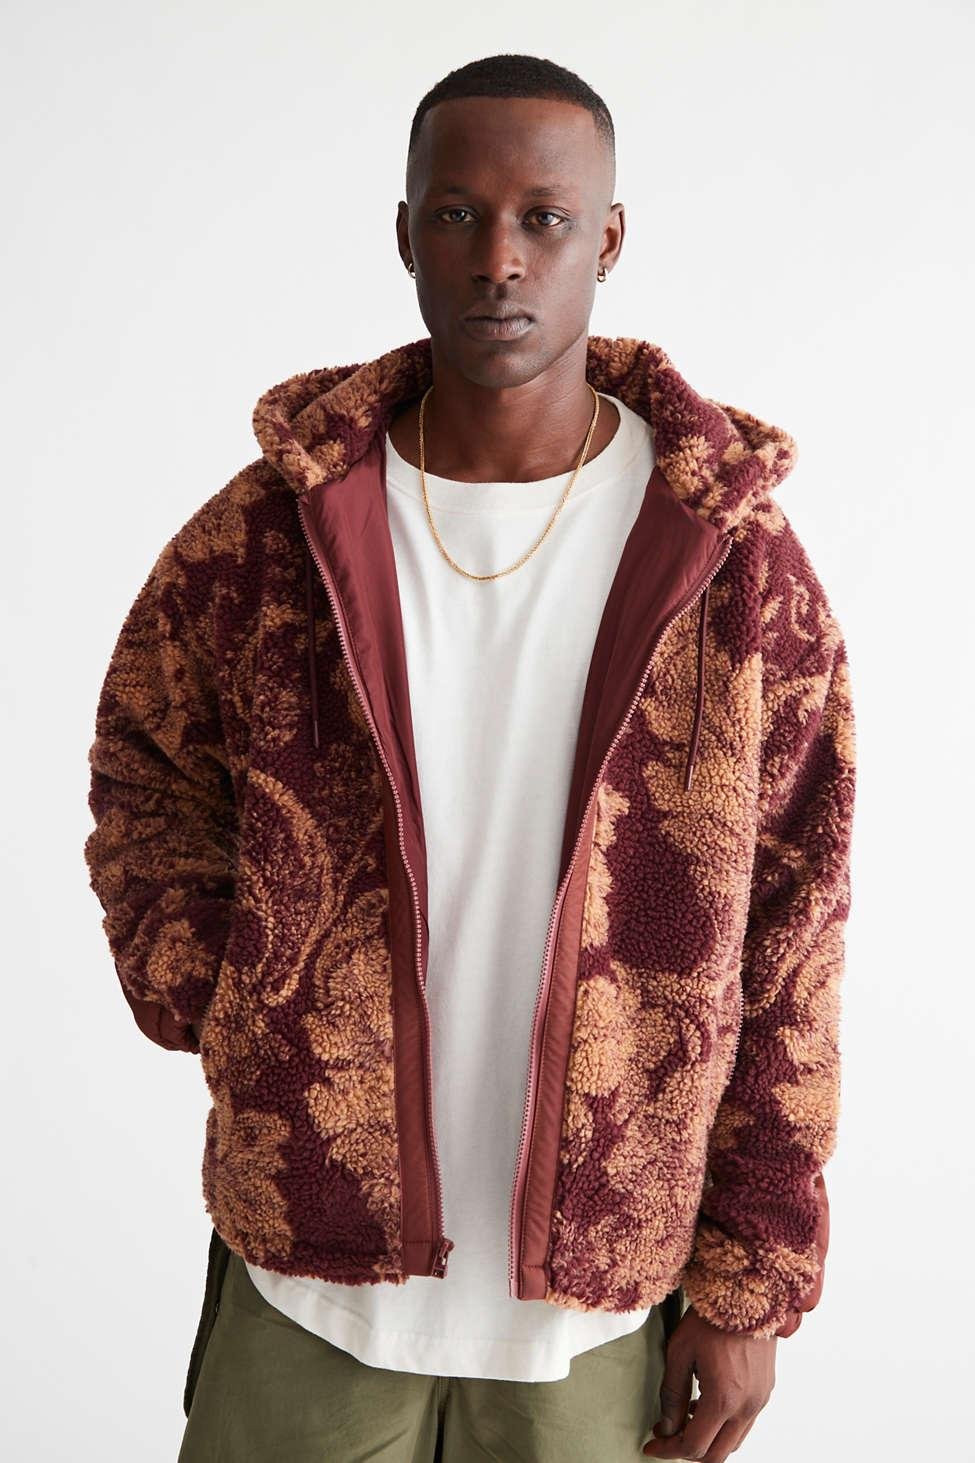 https://cdna.lystit.com/photos/urbanoutfitters/8856728f/urban-outfitters-designer-Maroon-Uo-Patterned-Fleece-Hooded-Jacket.jpeg